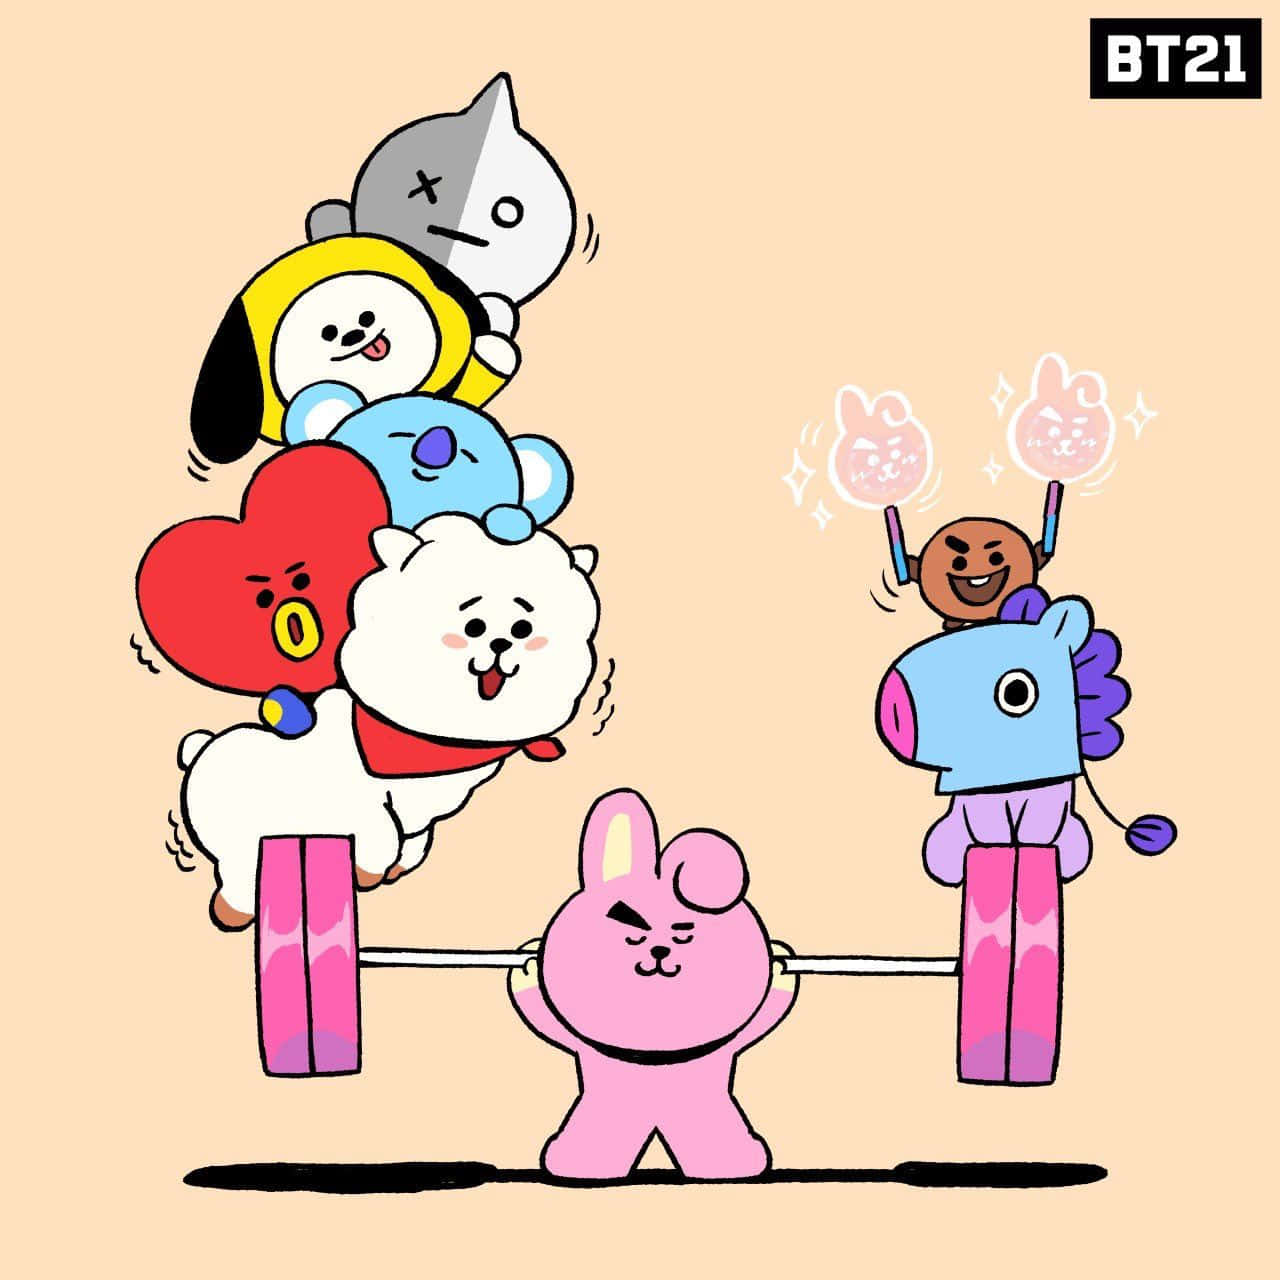 "Unlock All the Fun with Bt21!"